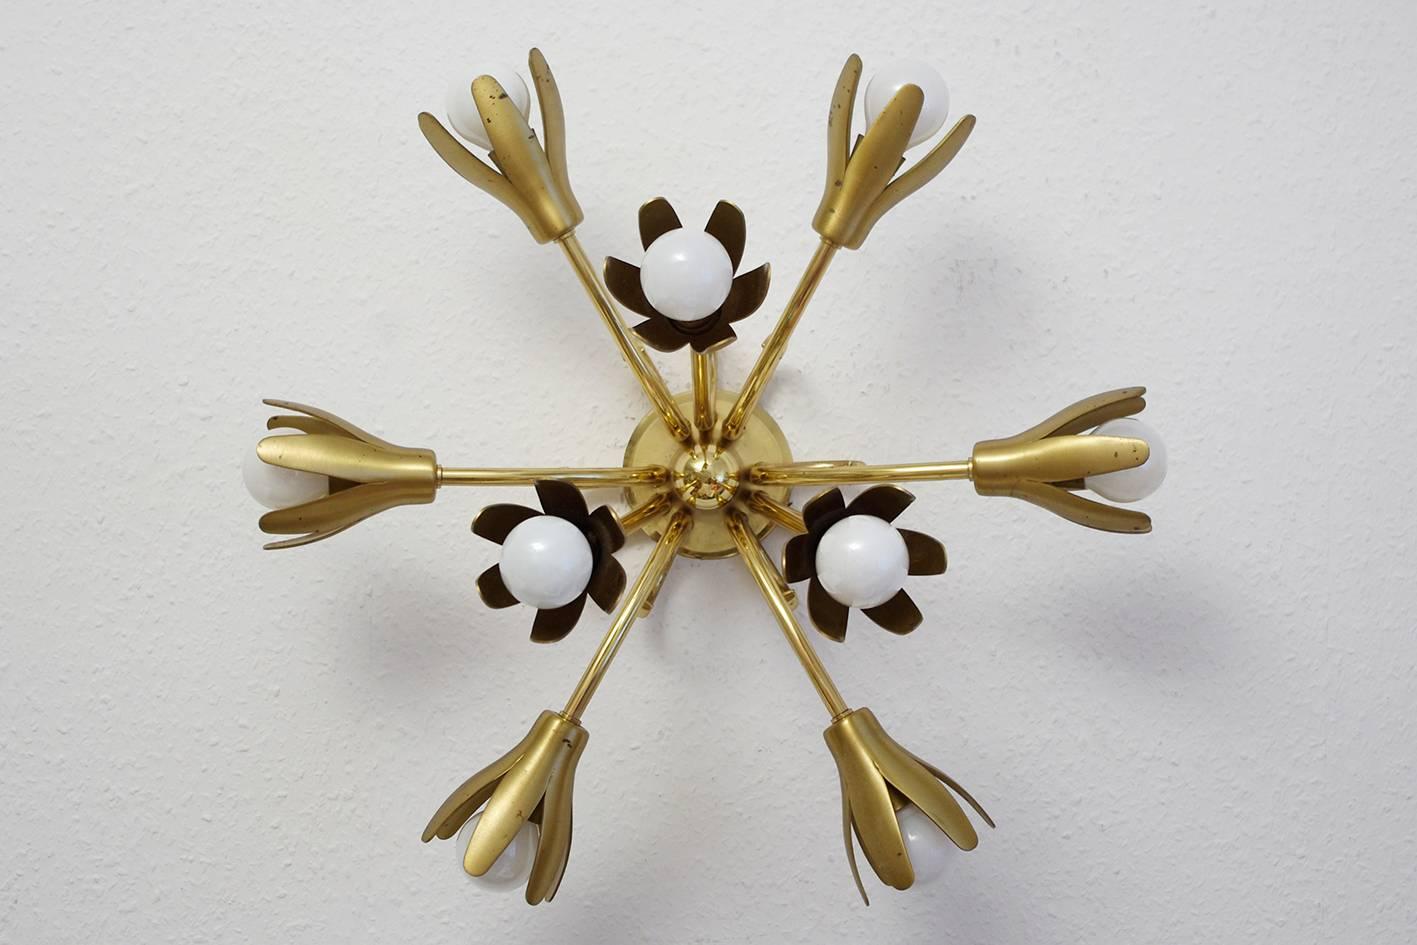 Beautiful solid polished and brushed brass flower chandelier with nine candelabra sockets.
Italy, 1950s